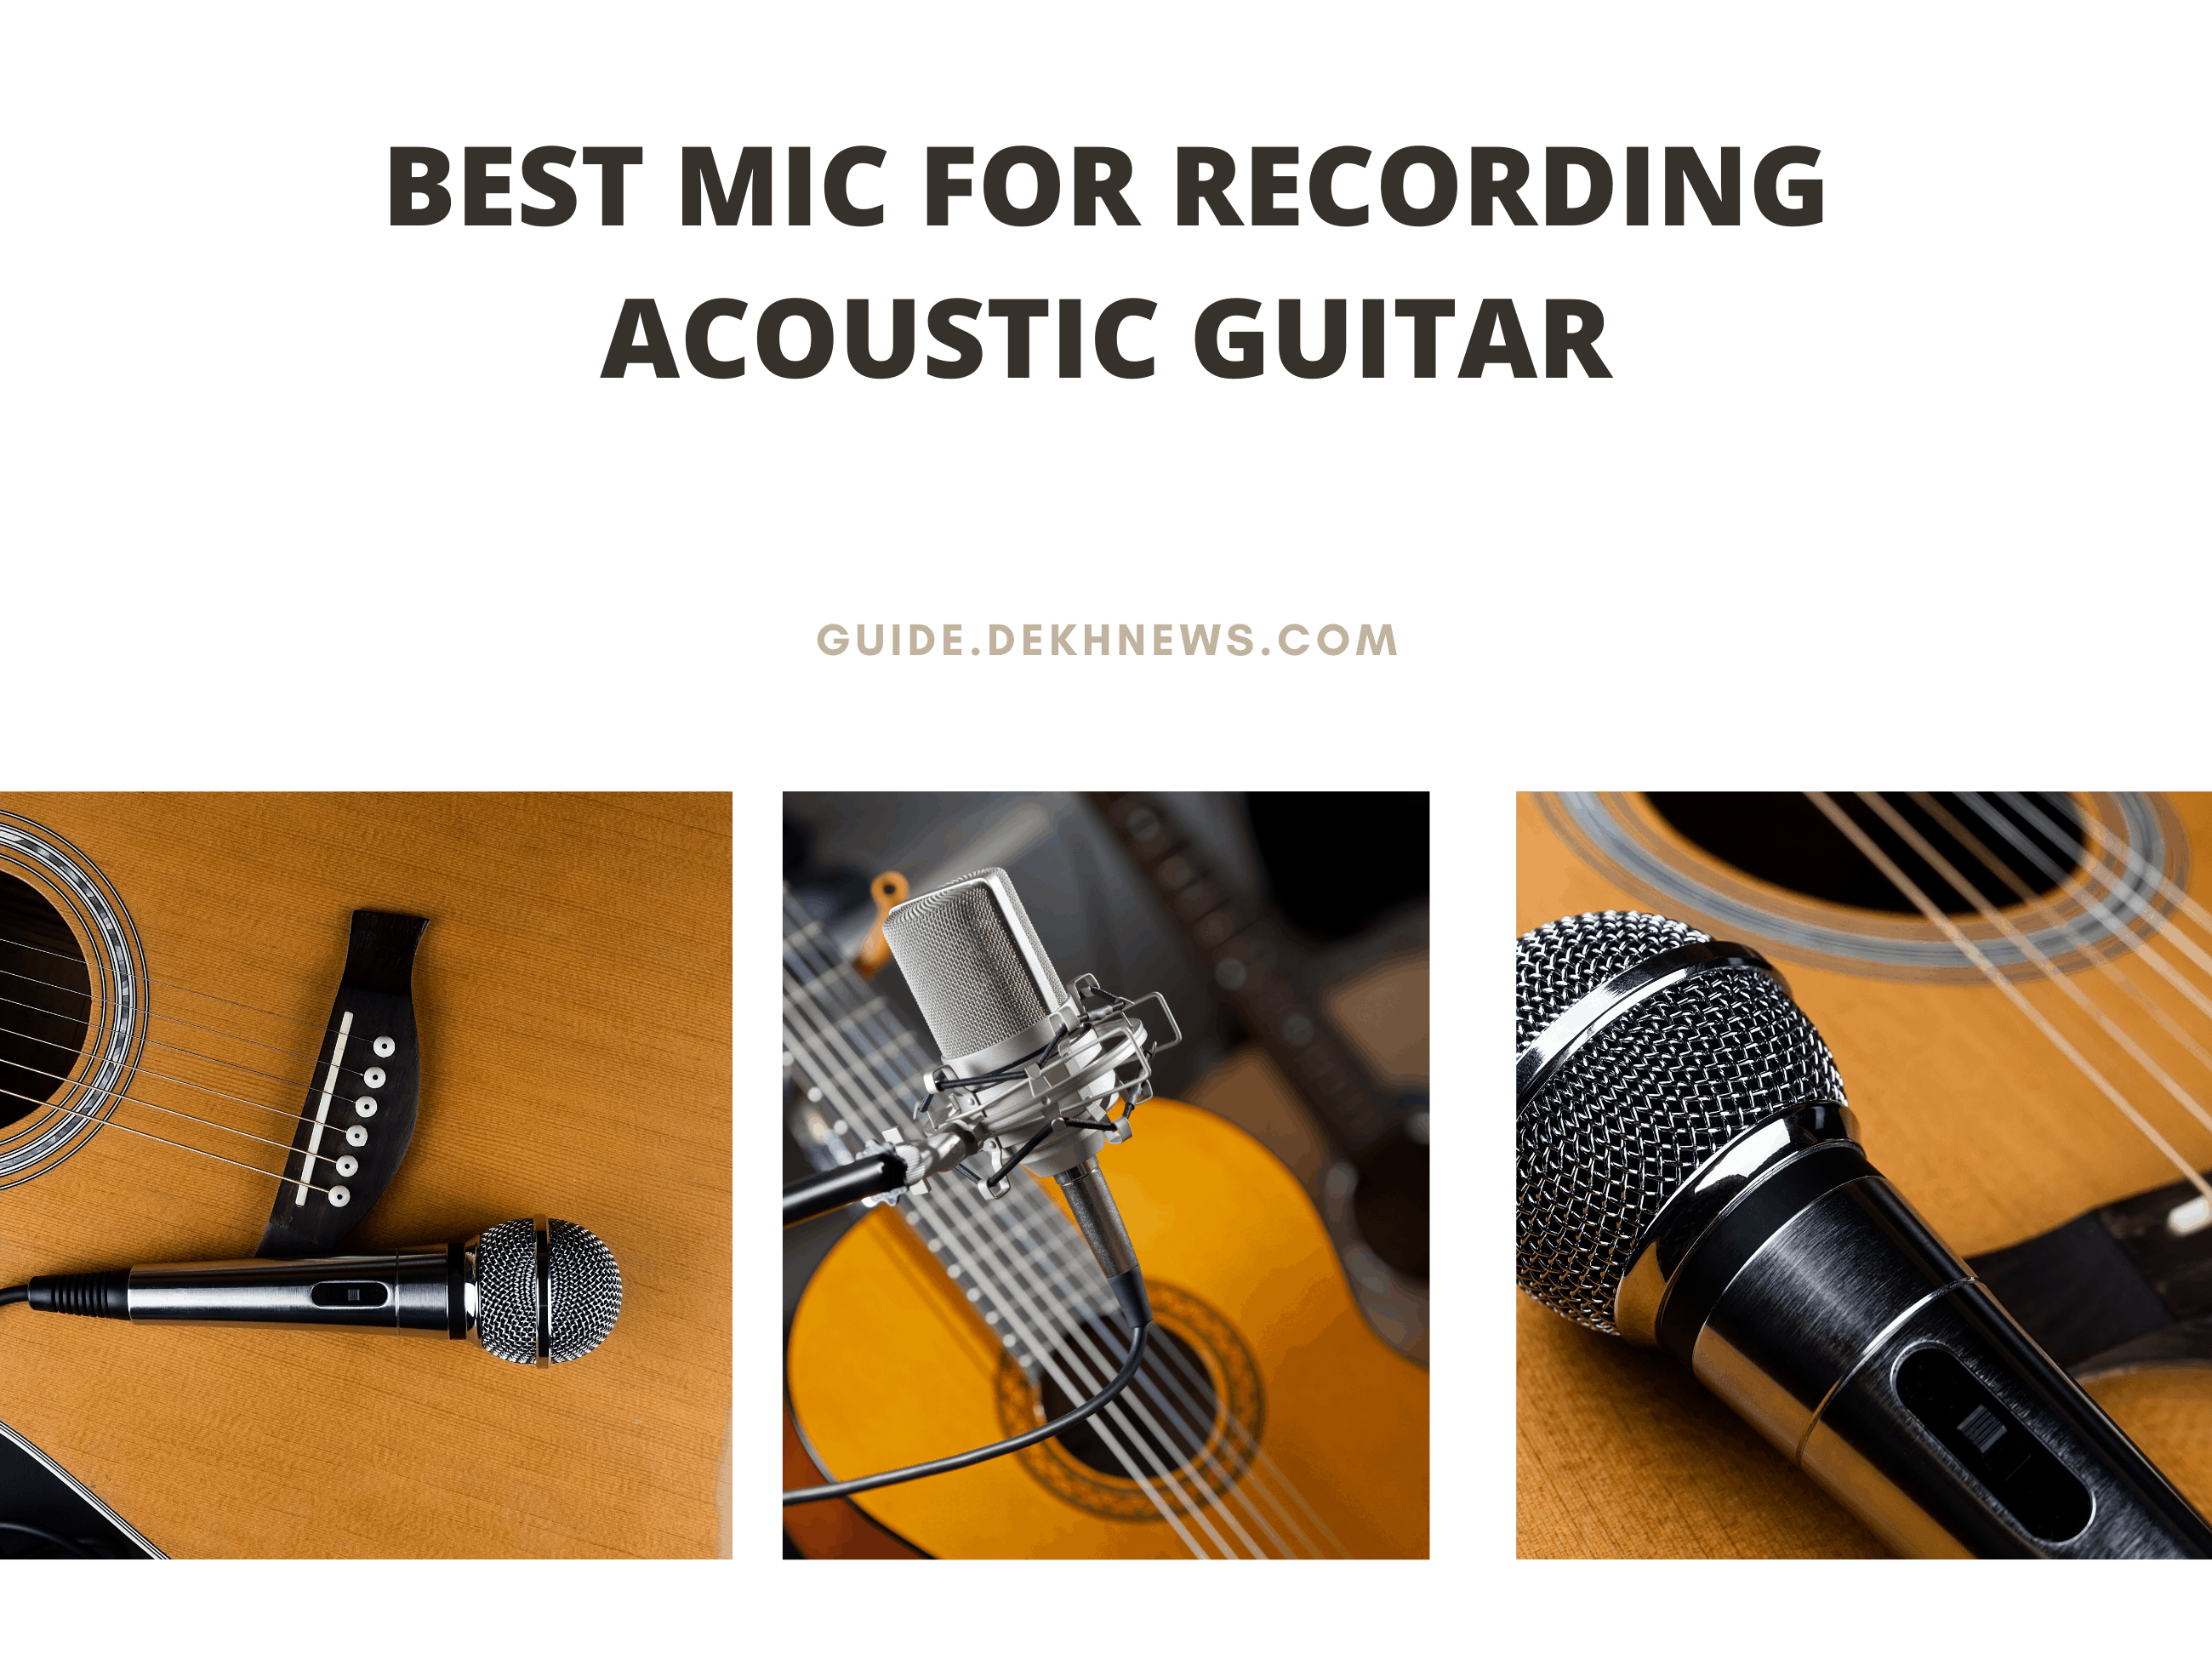 Best Mic for Recording Acoustic Guitar